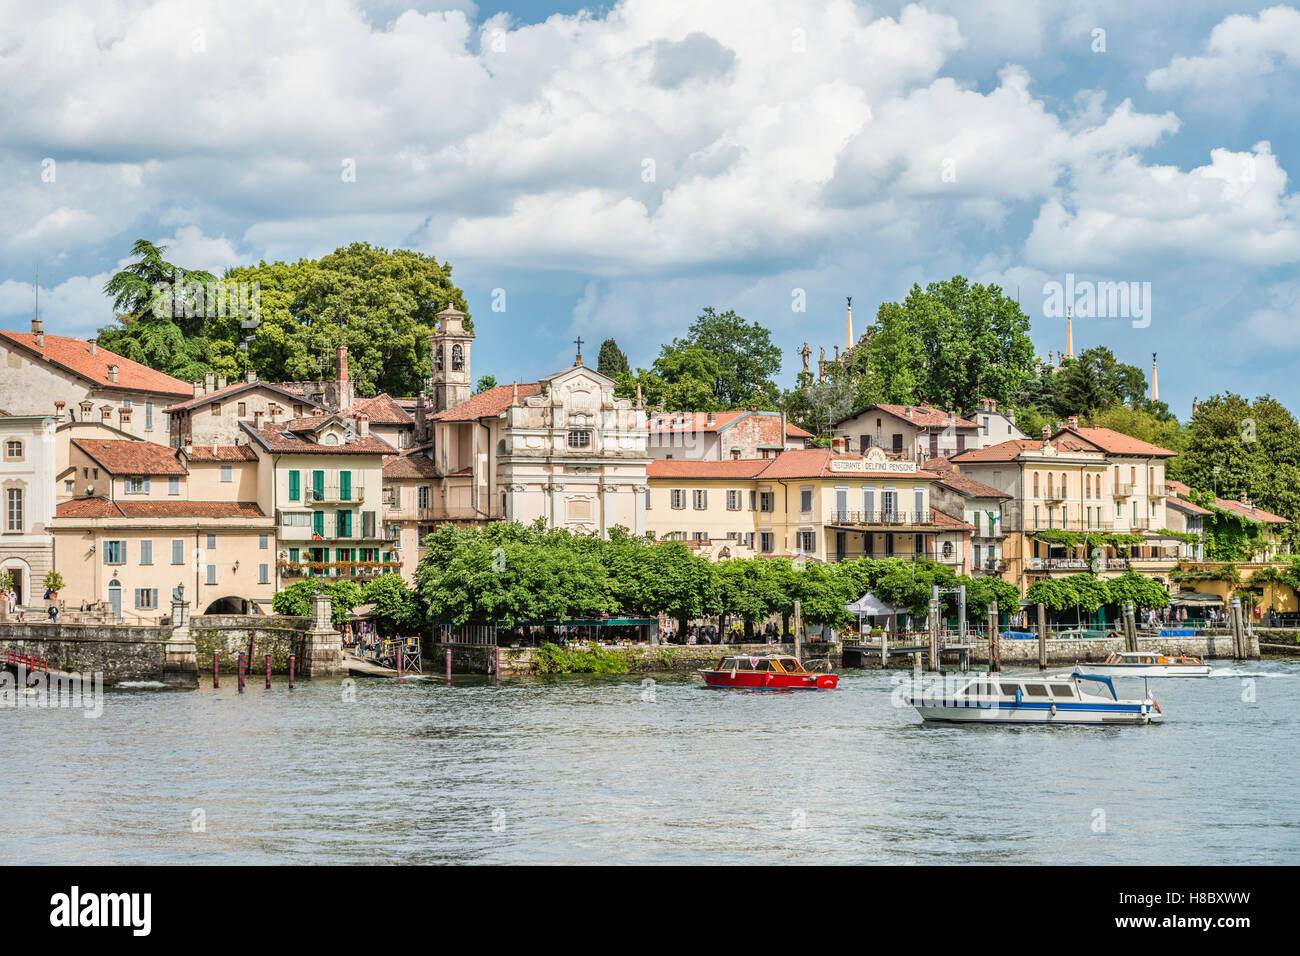 Shipping Pier at Isola Bella, Lago Maggiore, seen from the lakeside, Piedmont, Italy Stock Photo